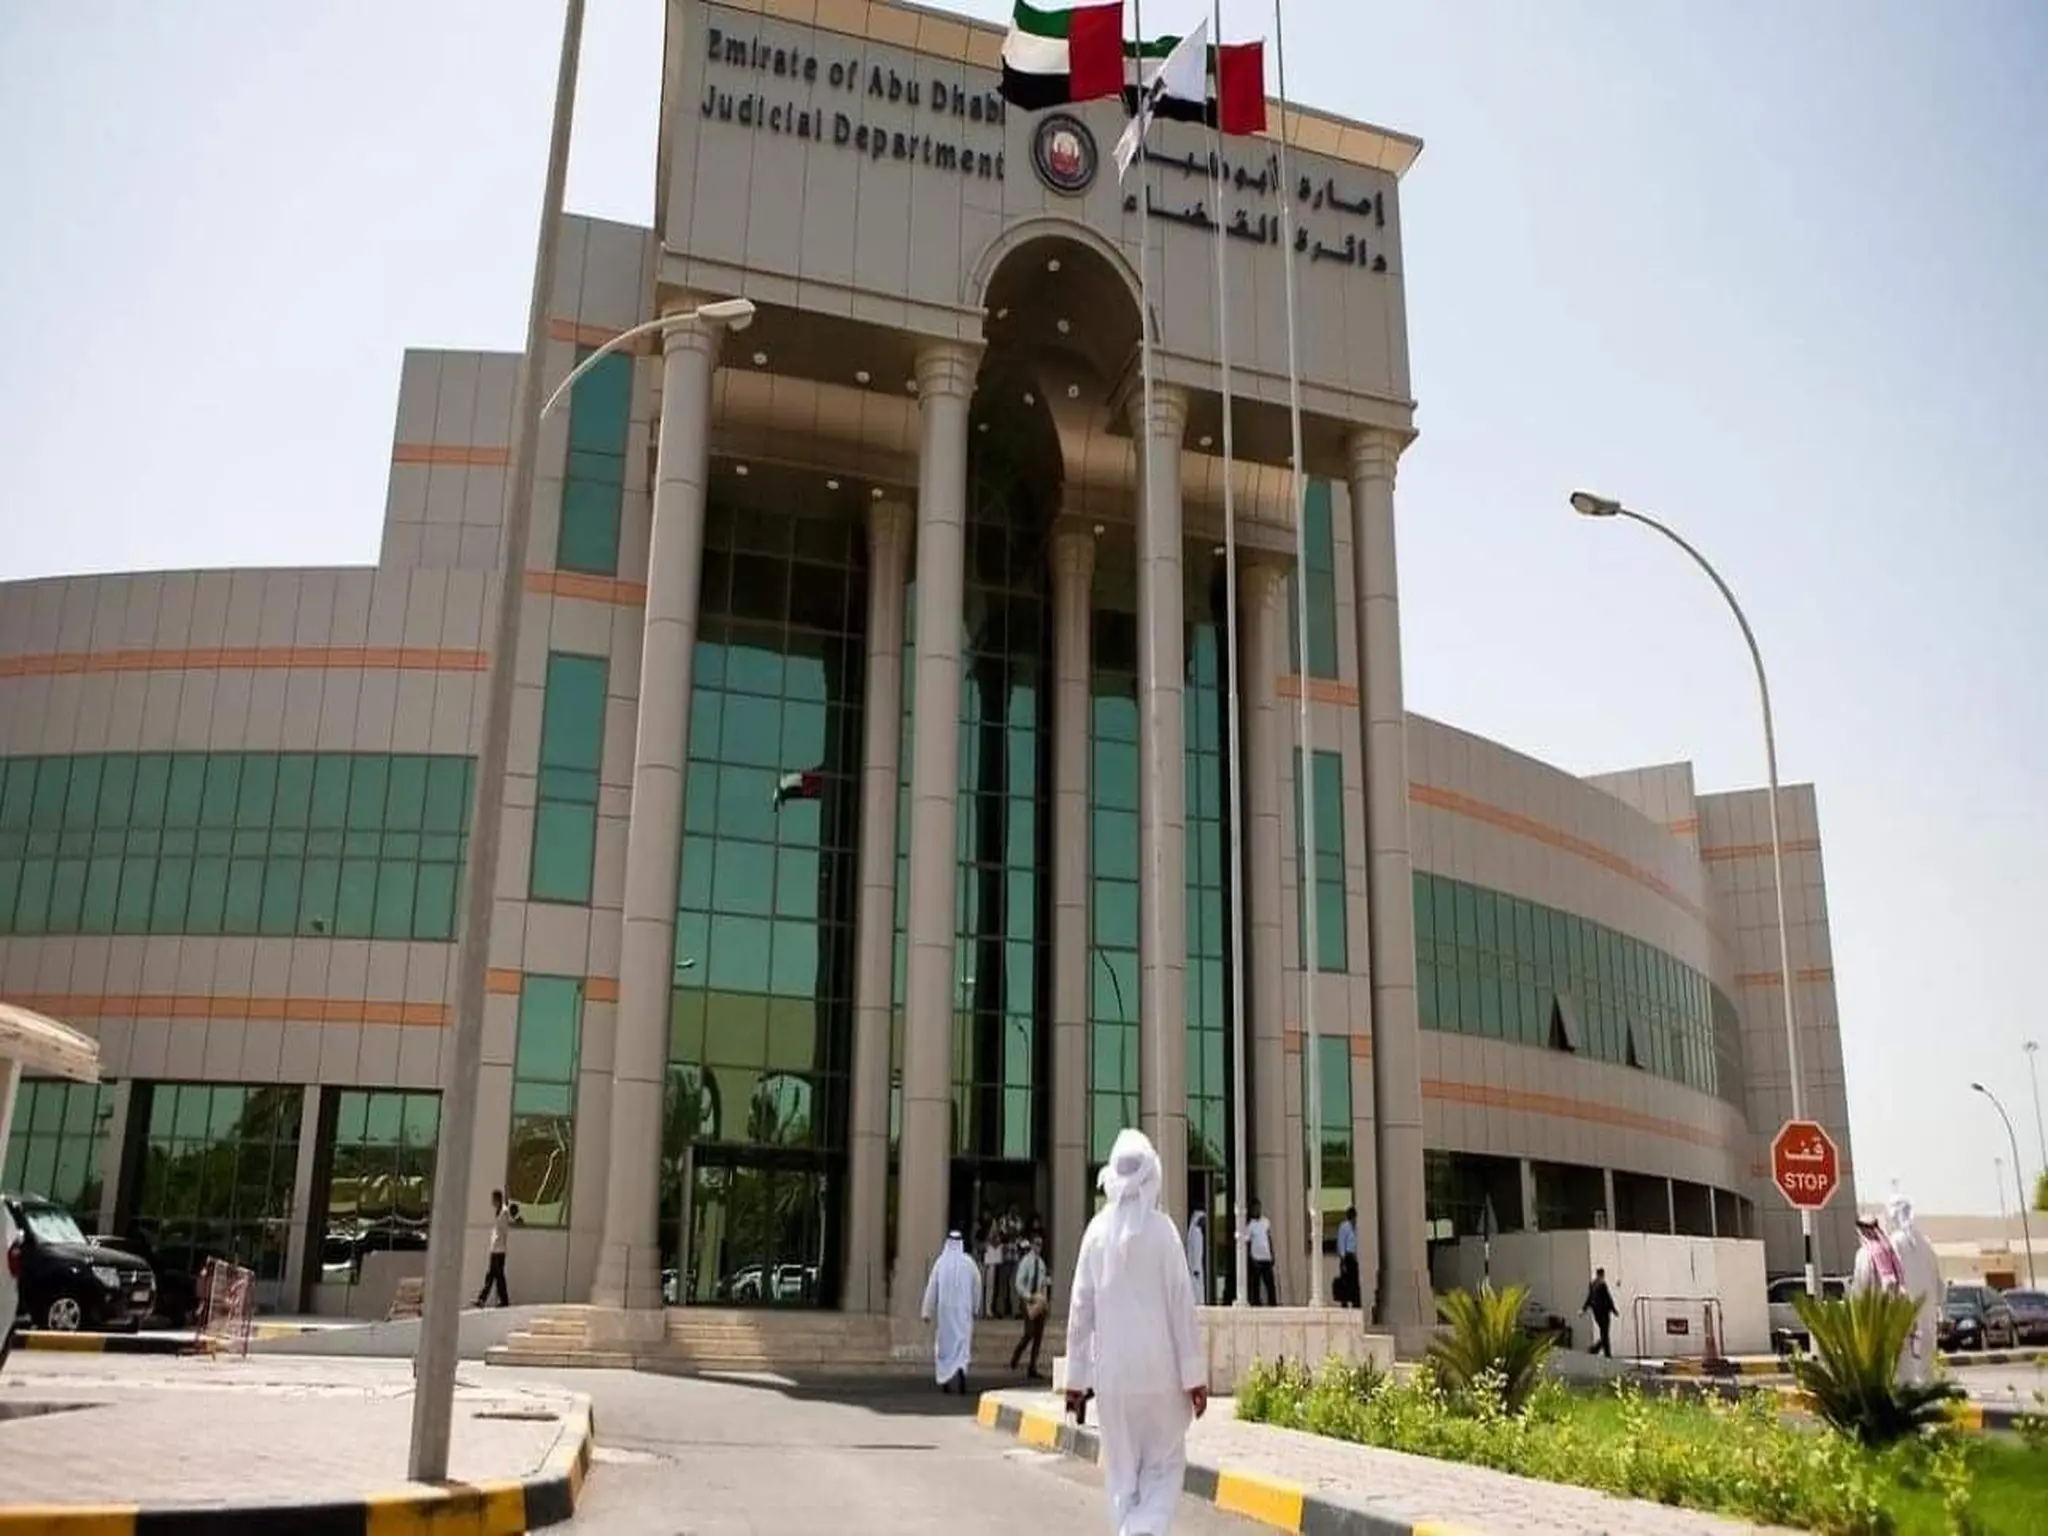 Abu Dhabi: Ruling that a female employee is entitled to compensation amounting to 120 thousand dirhams